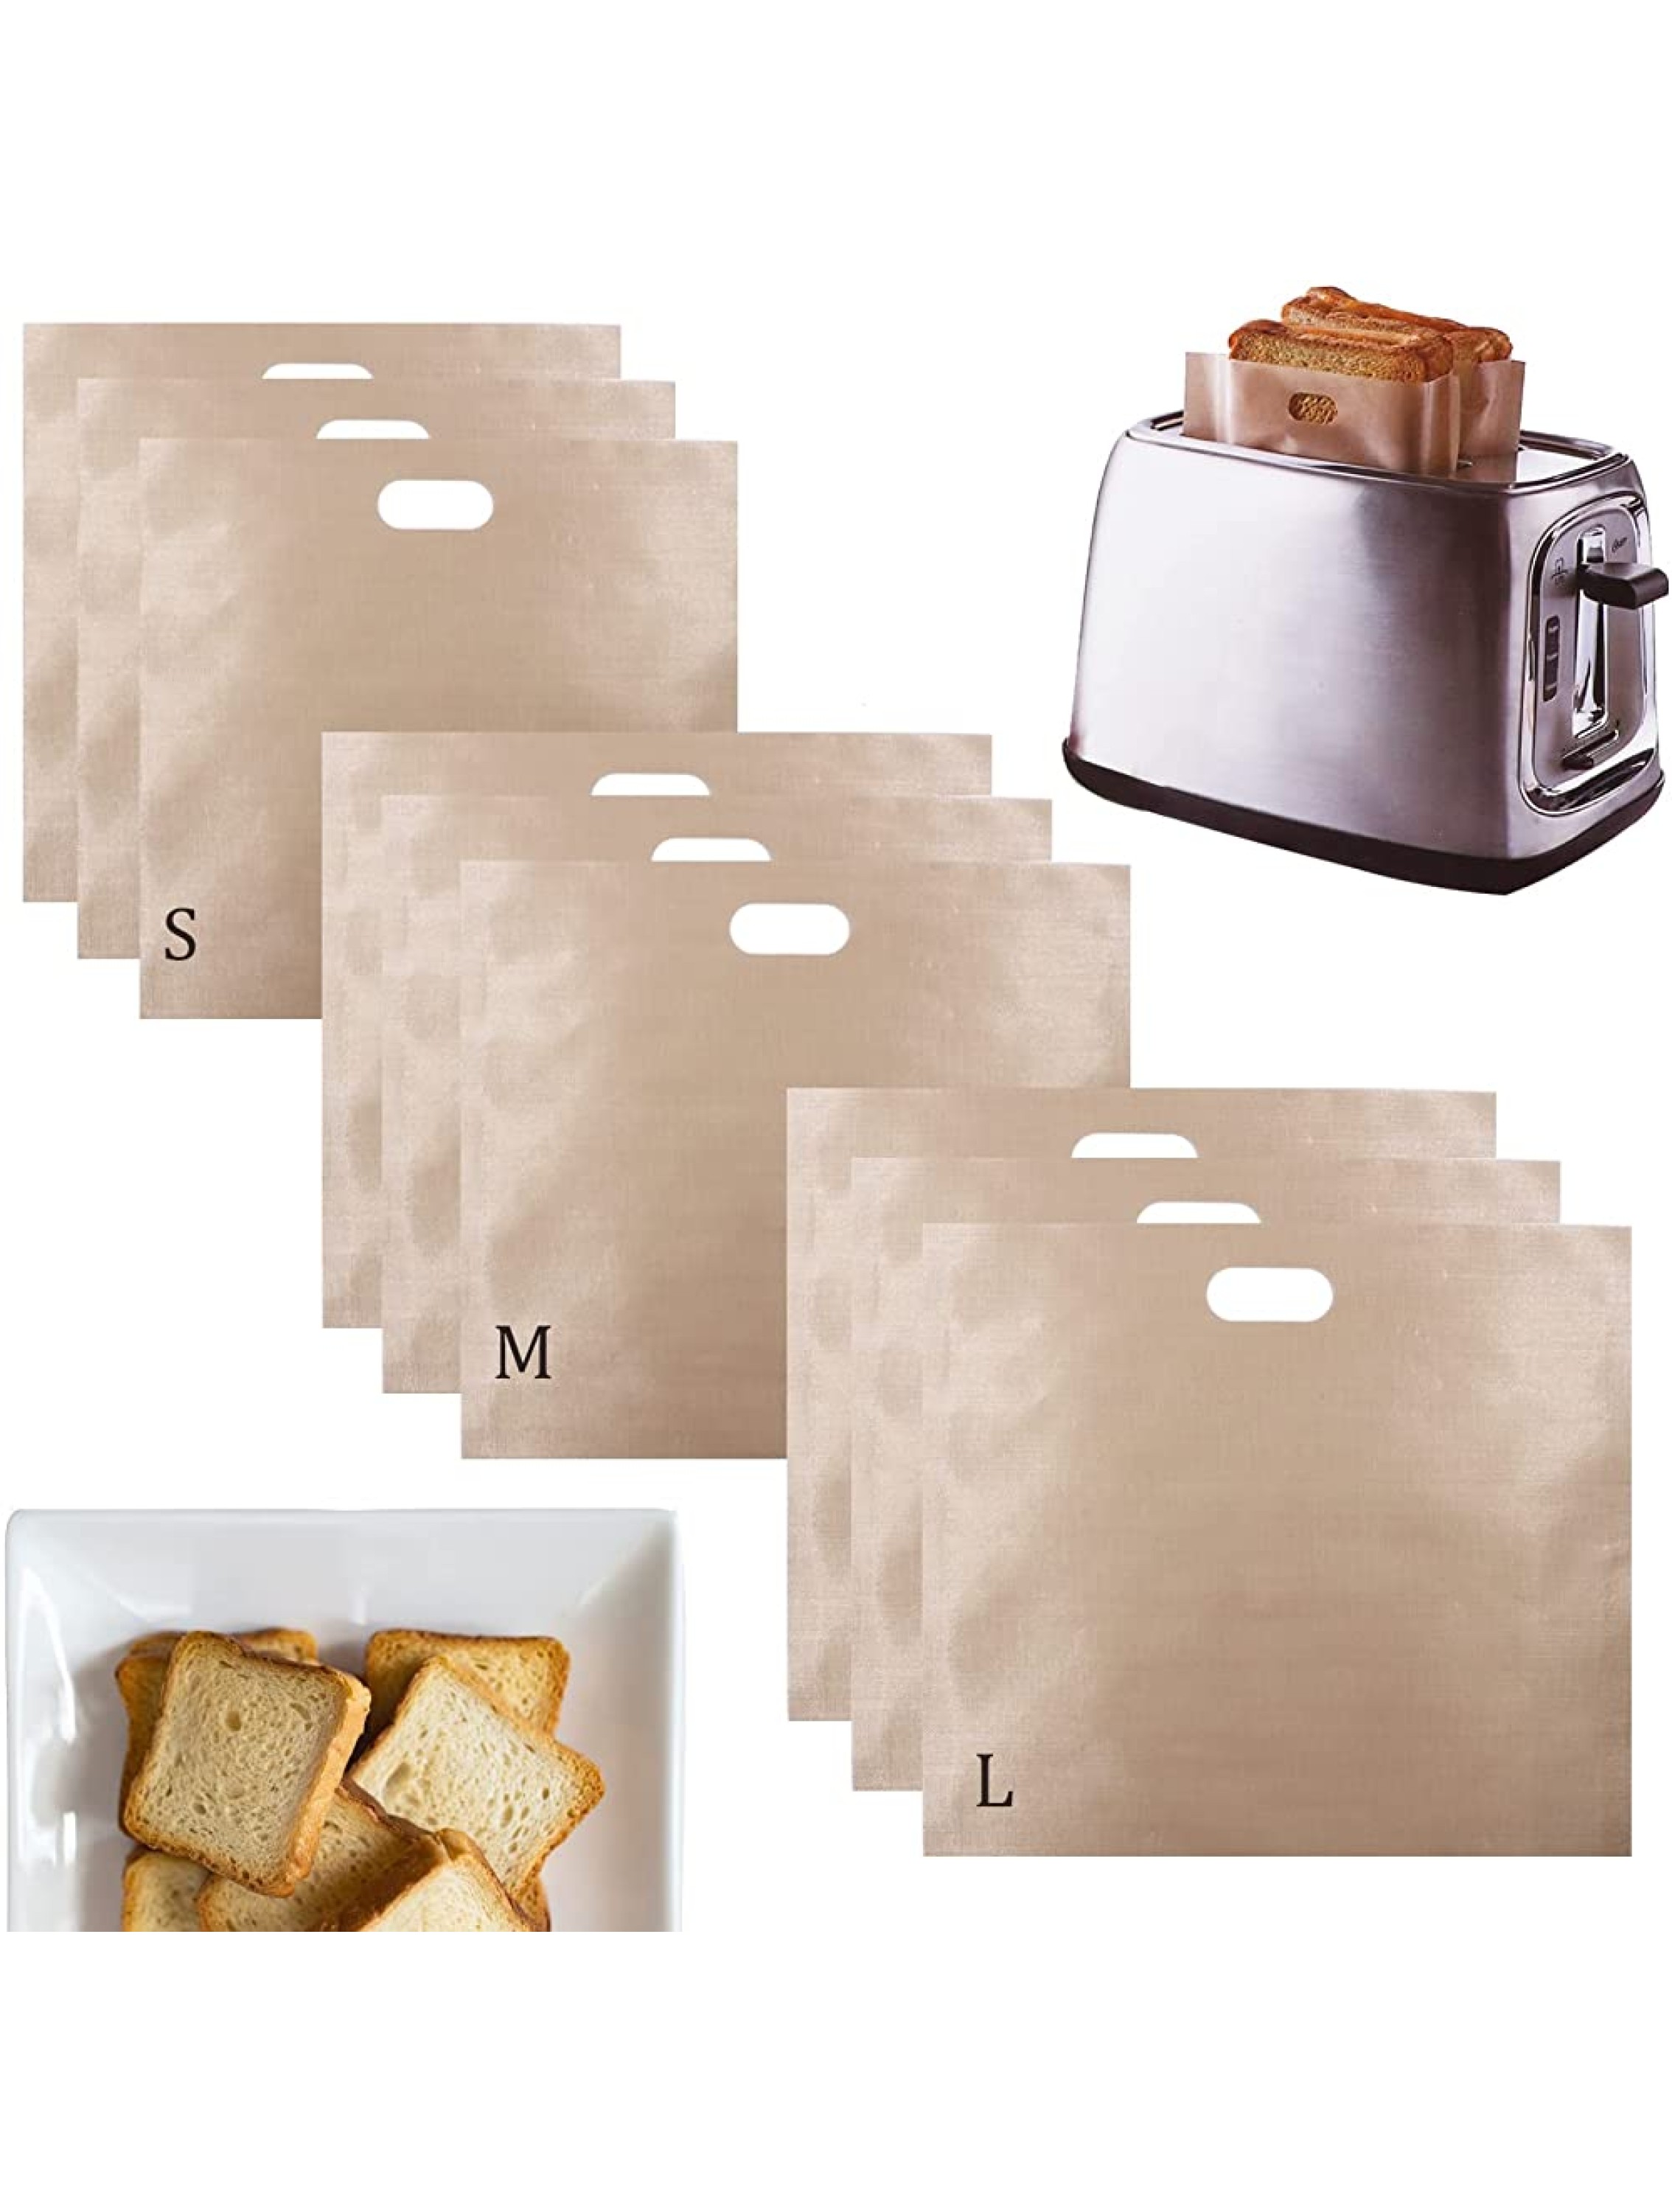 9 Pack Reusable Toaster Bags for Grilled Cheese Sandwiches Non Stick Toaster Sleeves for Sandwiches Pastries Pizza Slices Chicken Nuggets Heat Resistant Egg Pouch Toaster. 9 - BZFUDNBAE